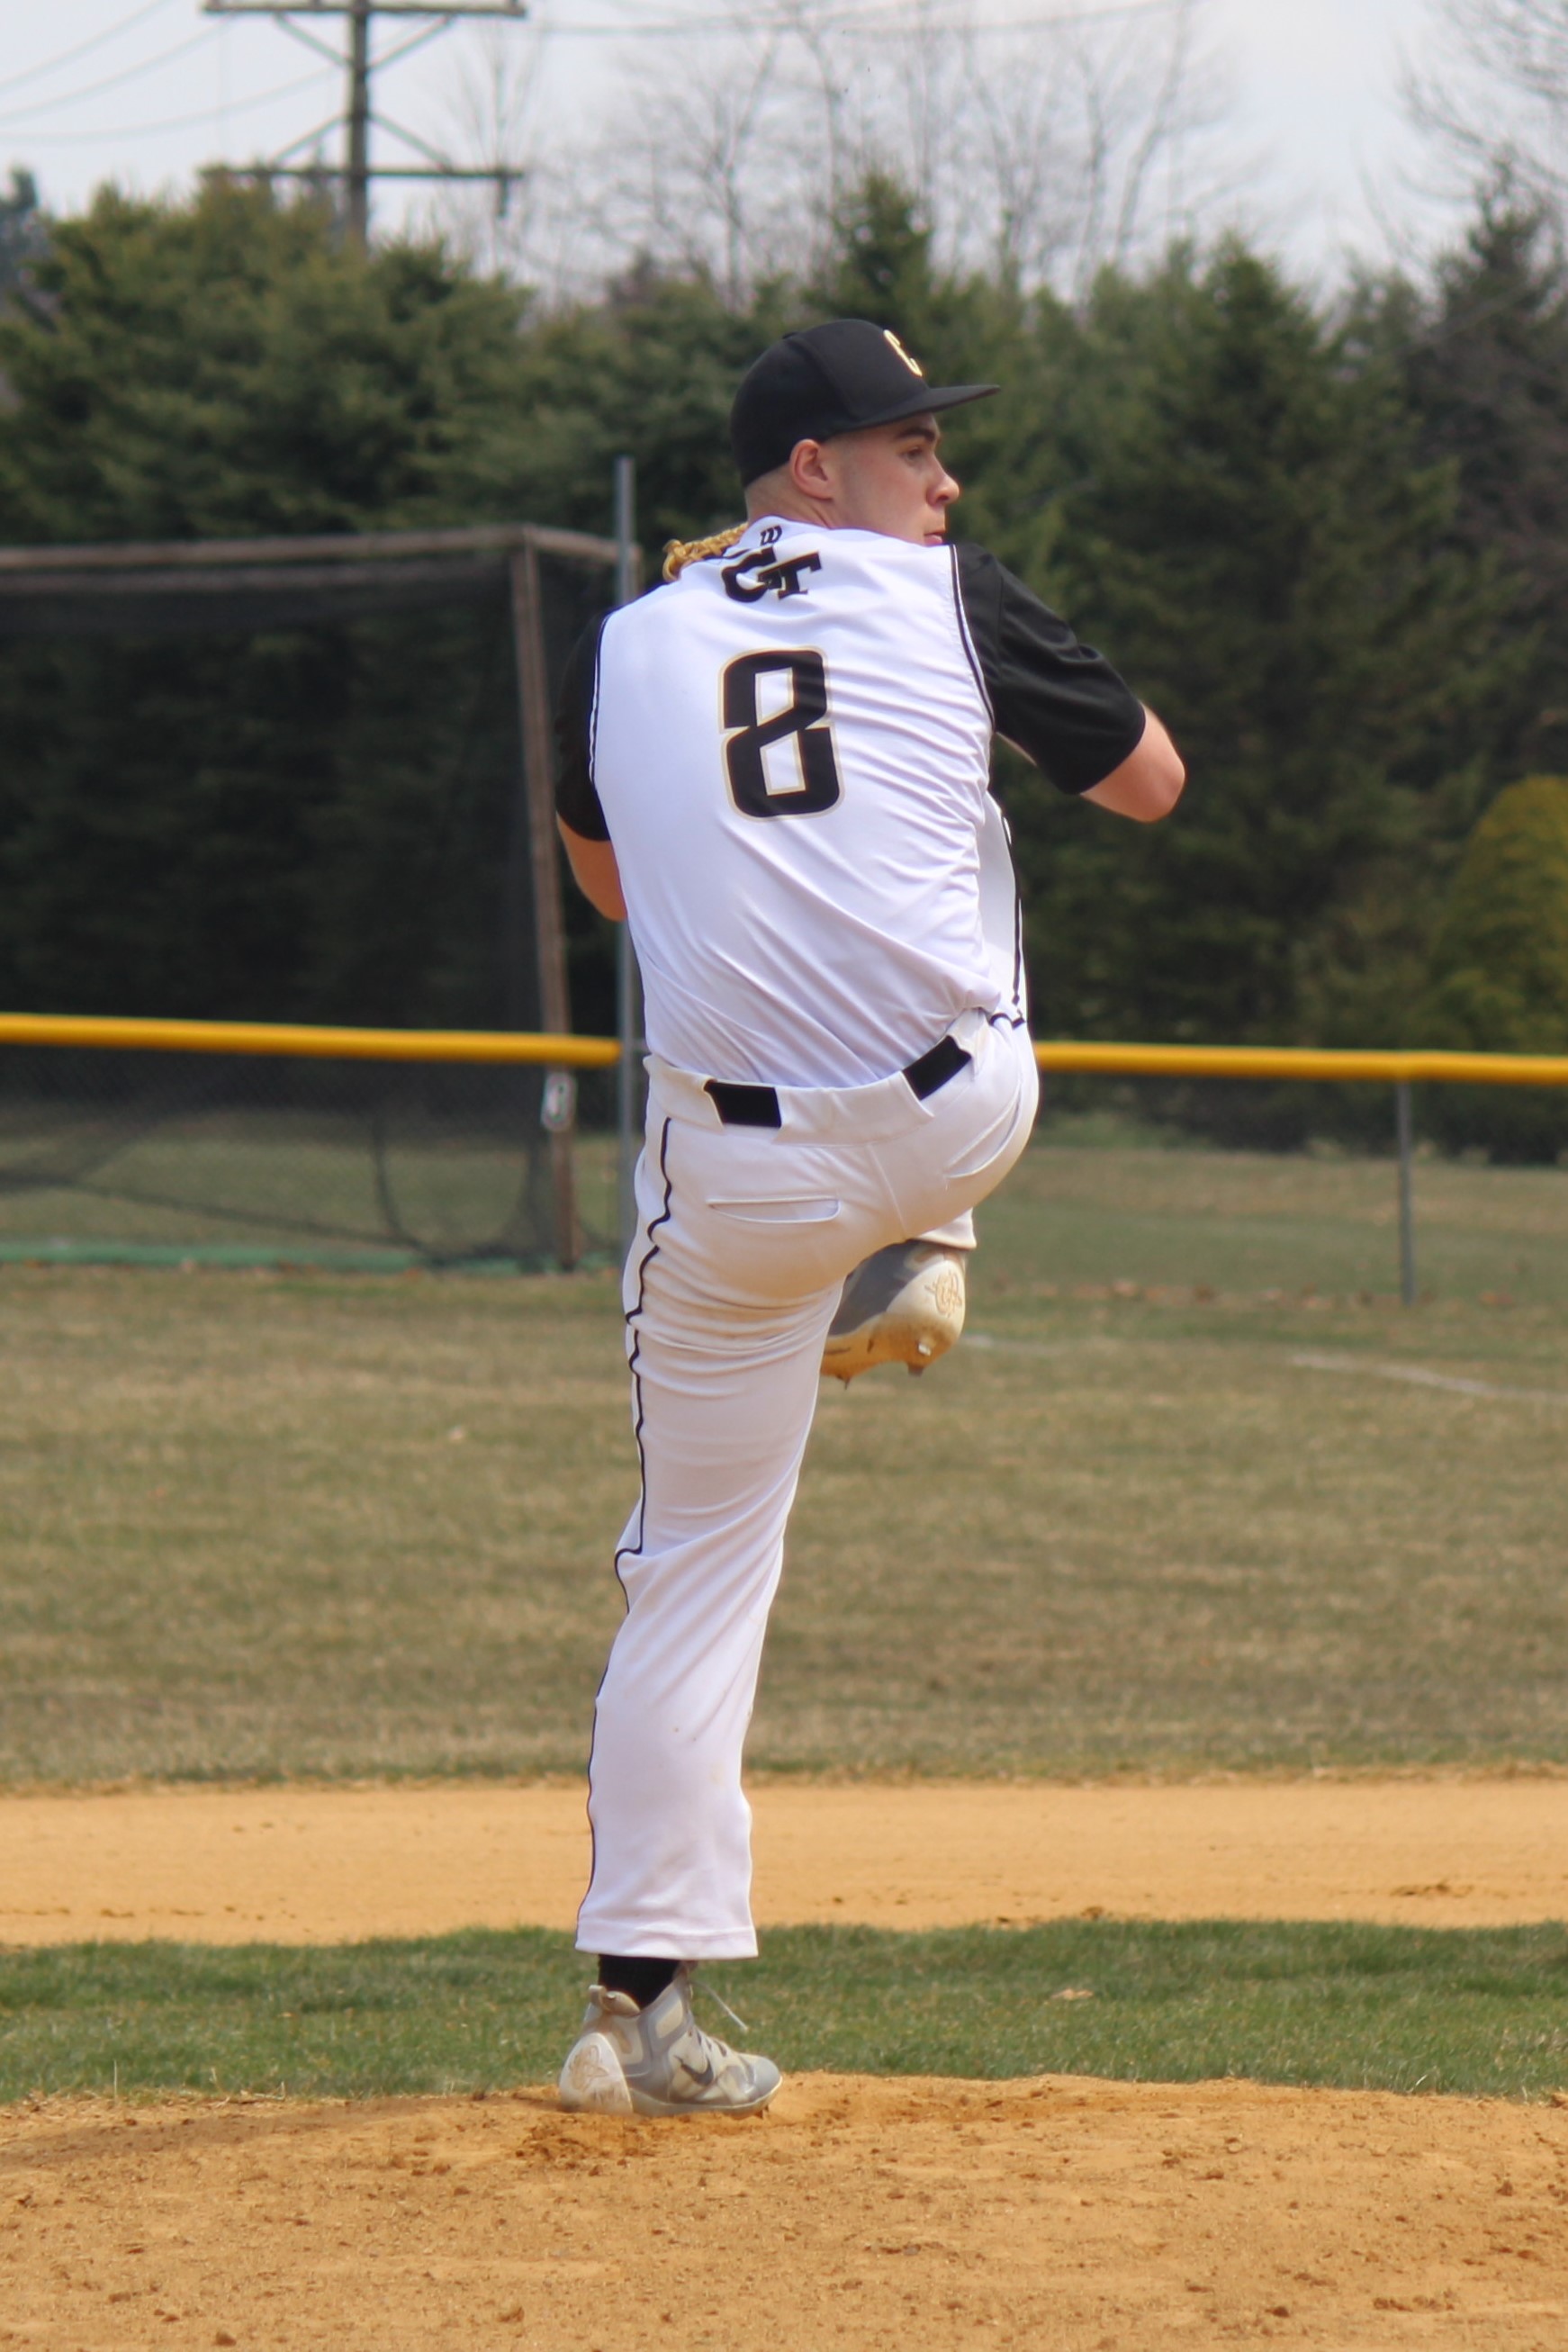 Bryce Timko pitched a one-hit gem against Moshannon Valley.  He didn't get the decision, but scored the winning run for Curwensville.